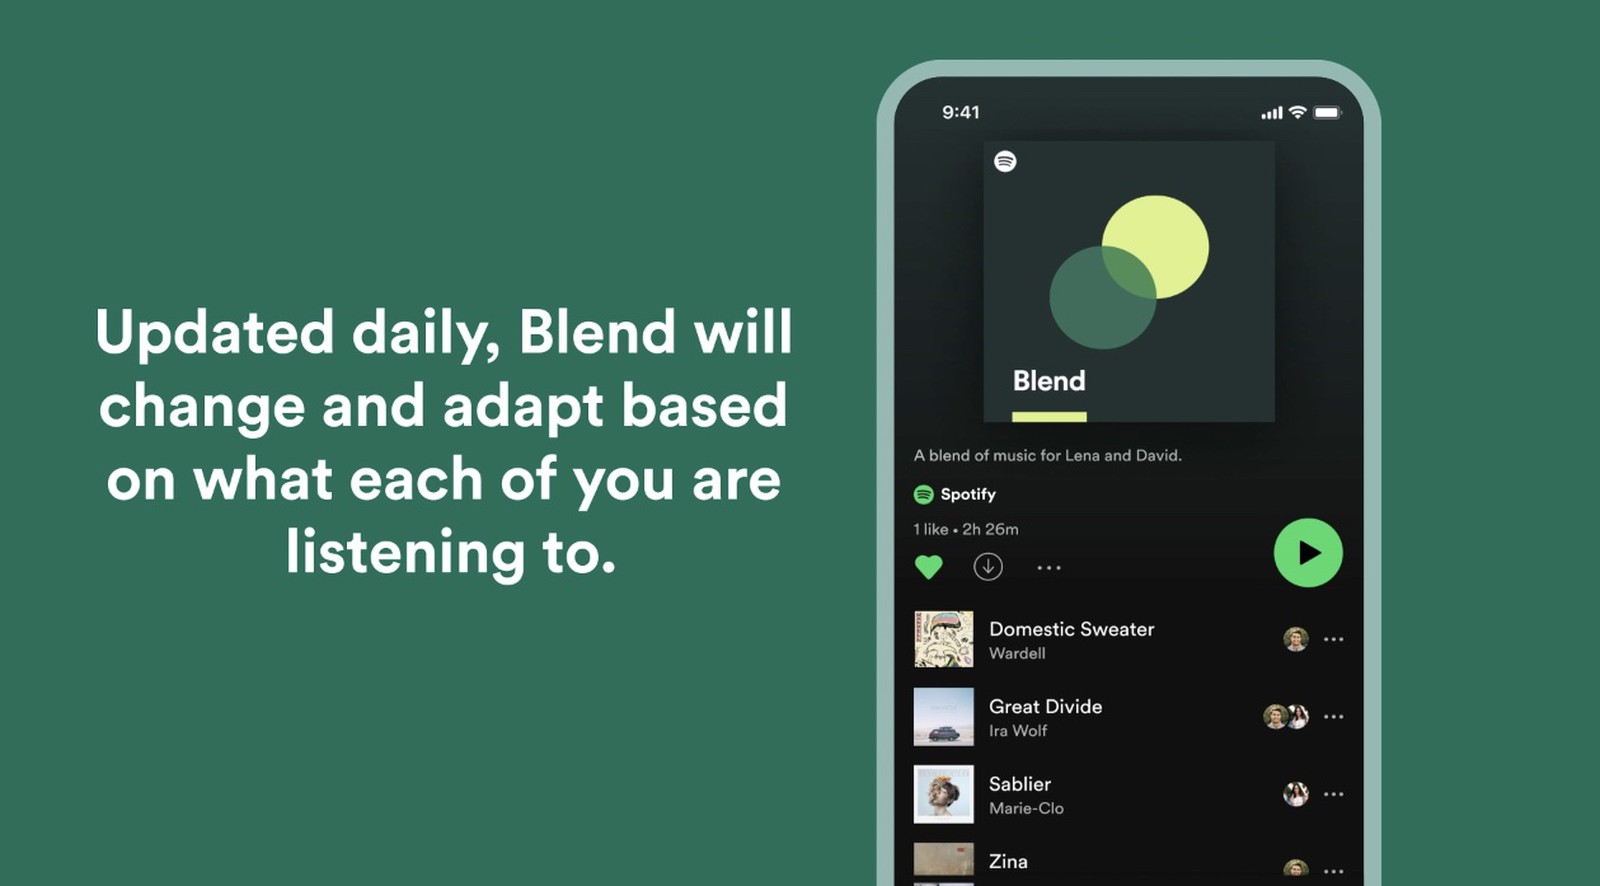 Spotify Launches New Stat Tracking 'Only You' Hub and Collaborative